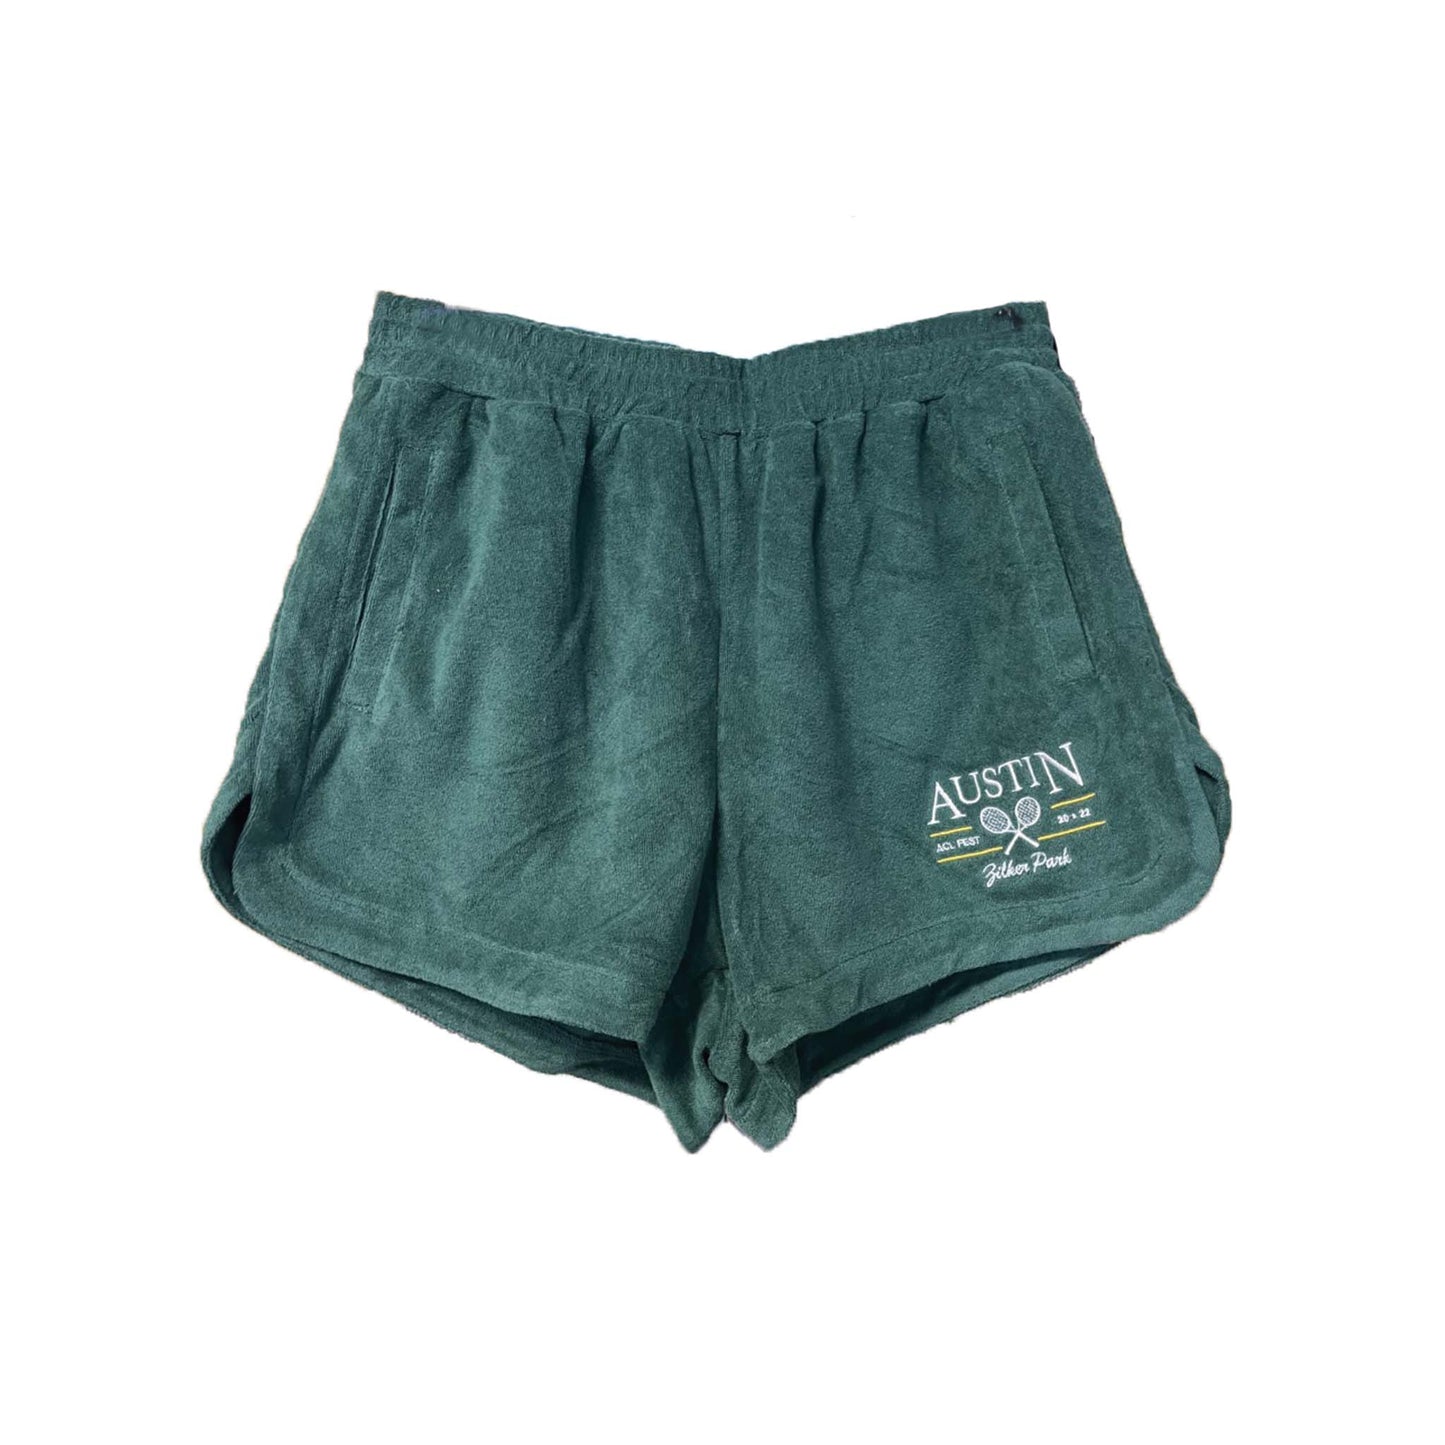 ACL Athletic Club Terry Shorts